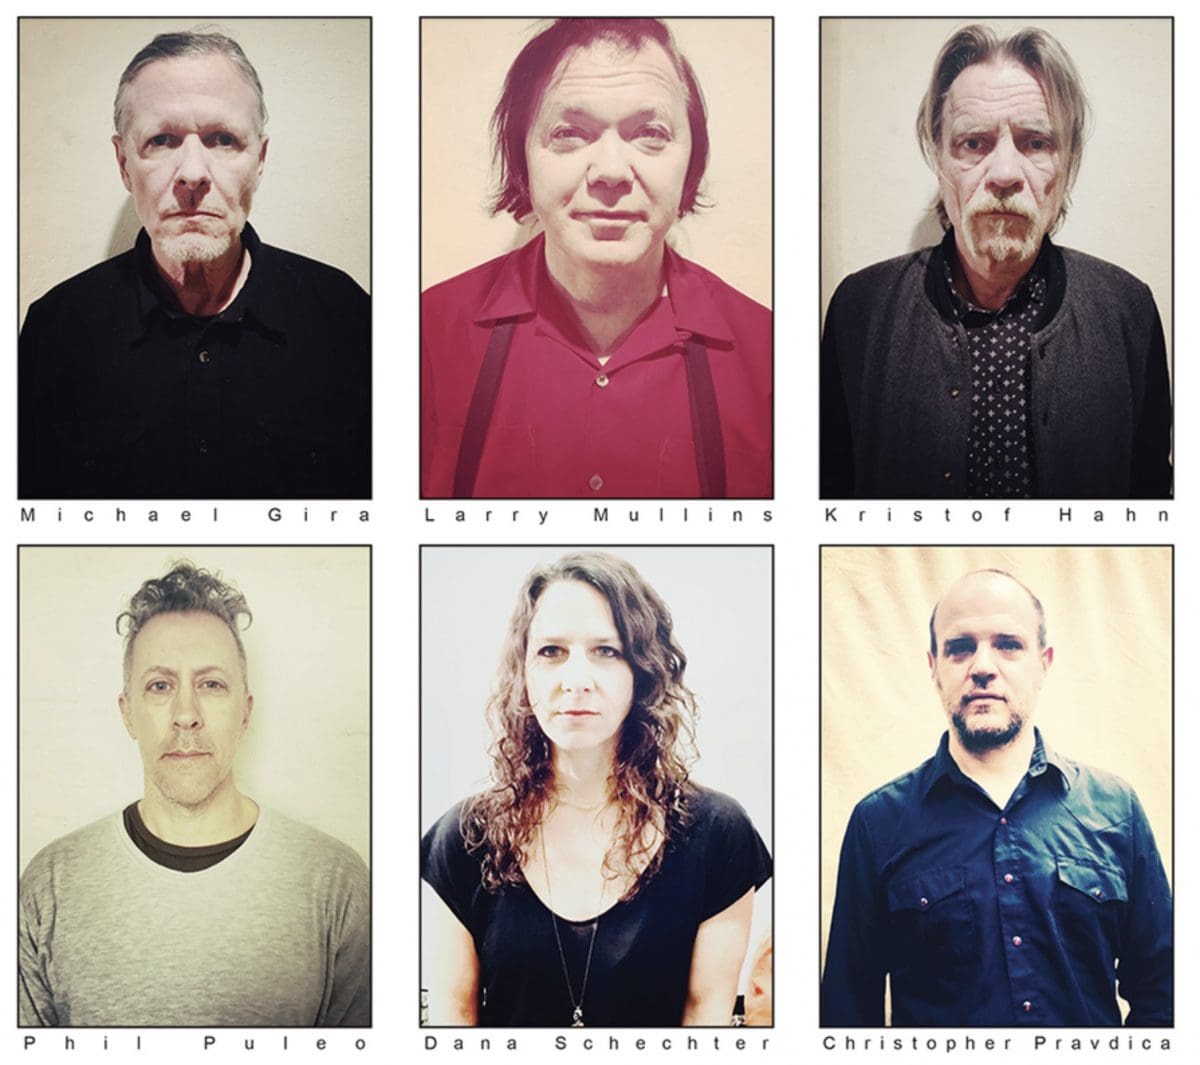 Swans embark on first North American tour dates since 2017